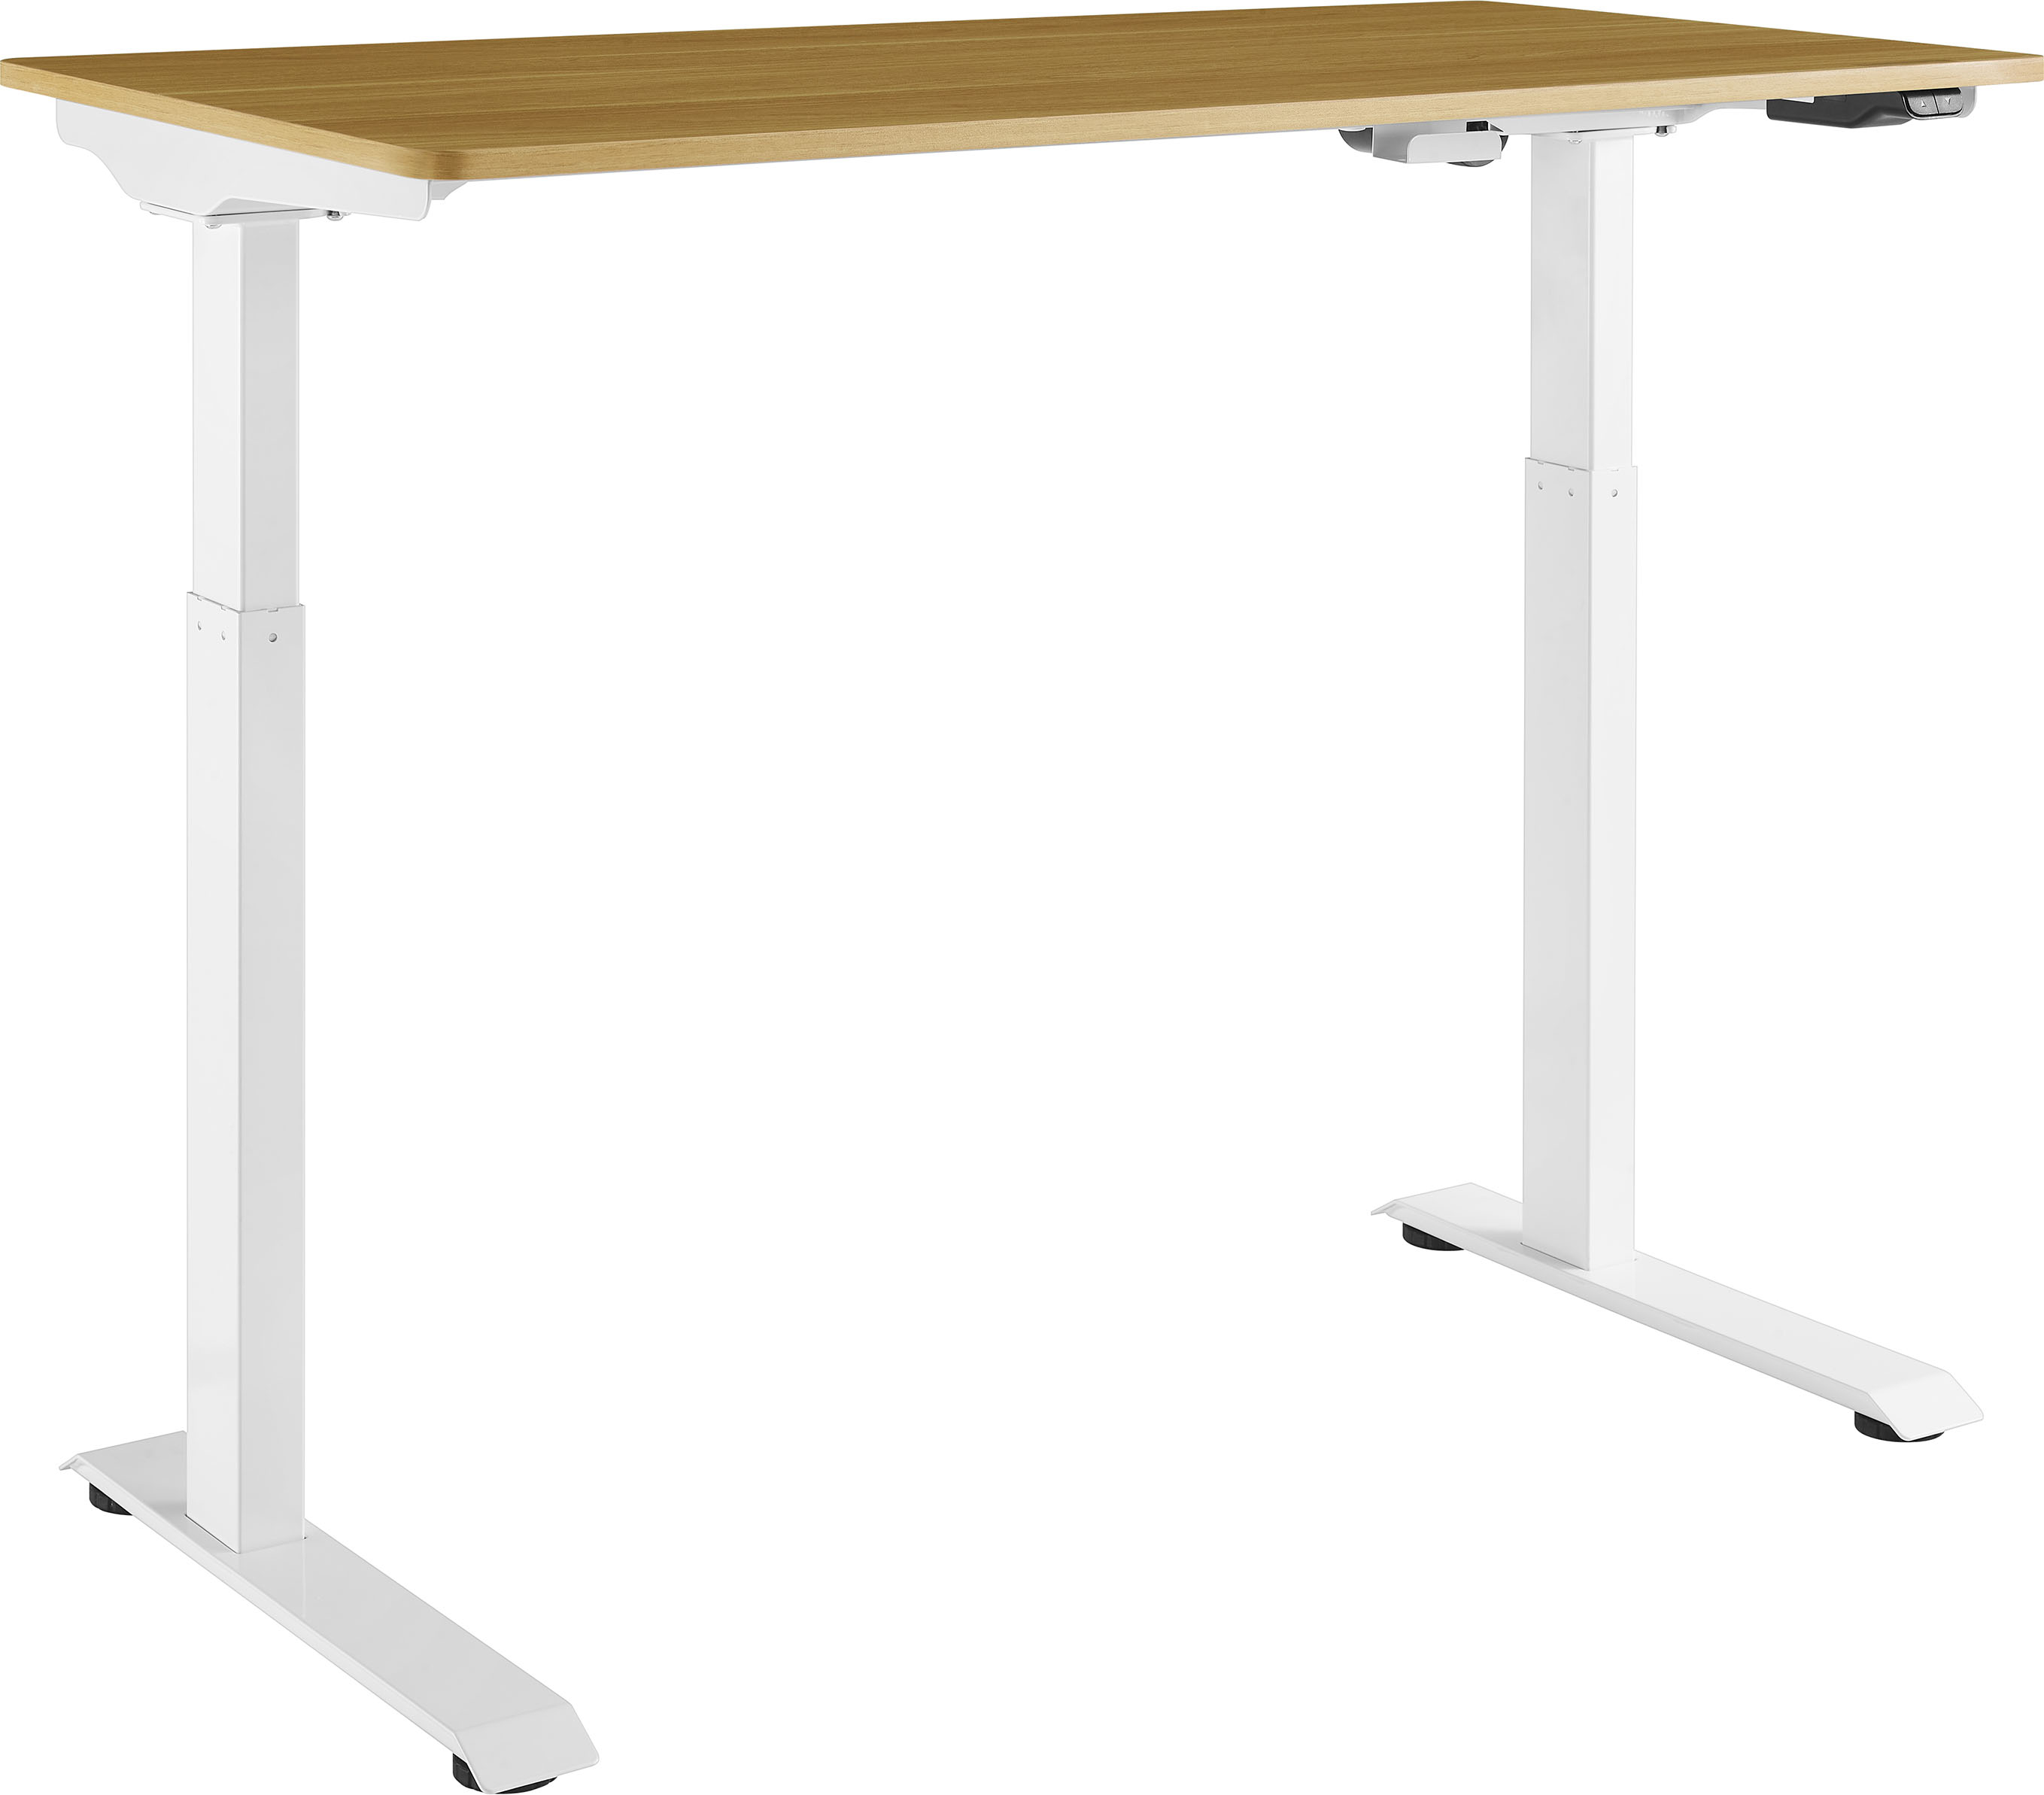 Angle View: Insignia™ - Adjustable Standing Desk with Electronic Control - 47.2" - Oak